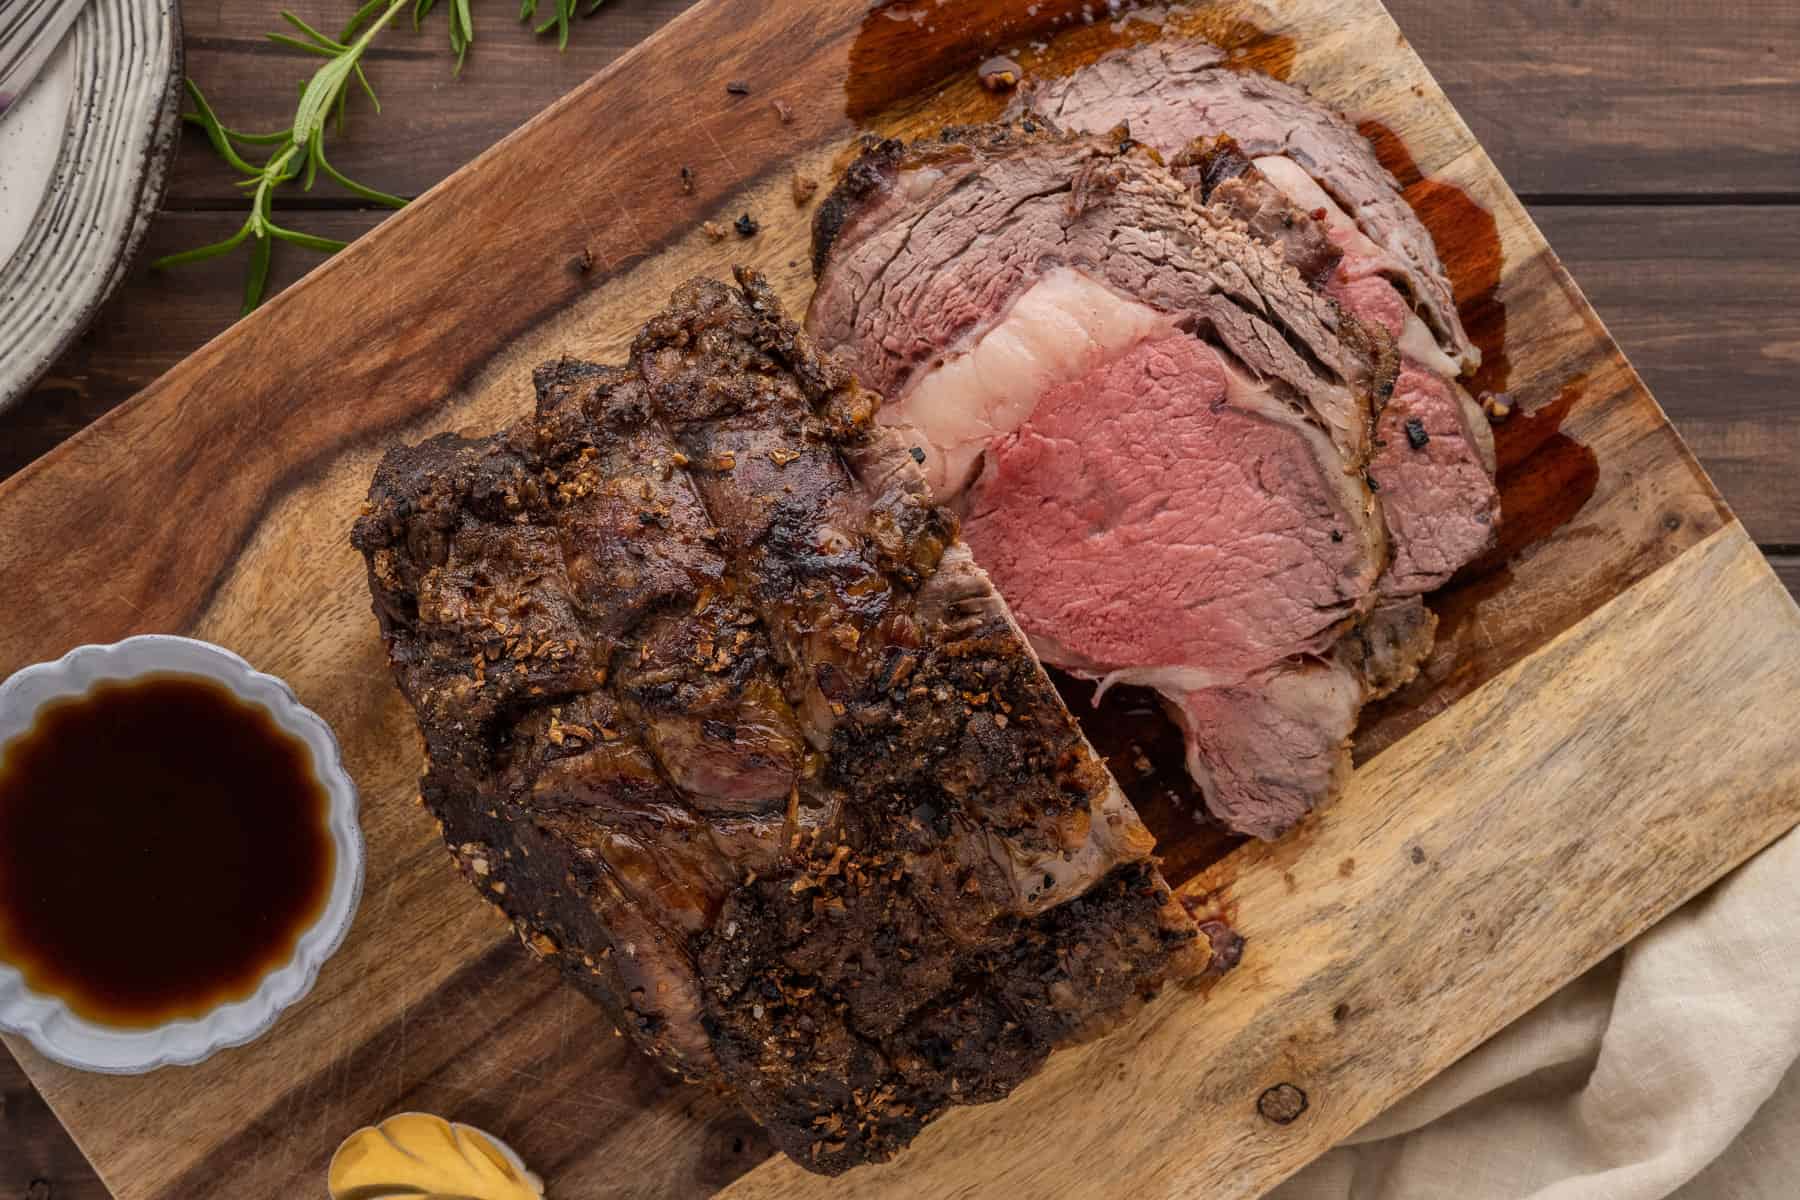 An overhead image of the prime rib half sliced on a cutting board.